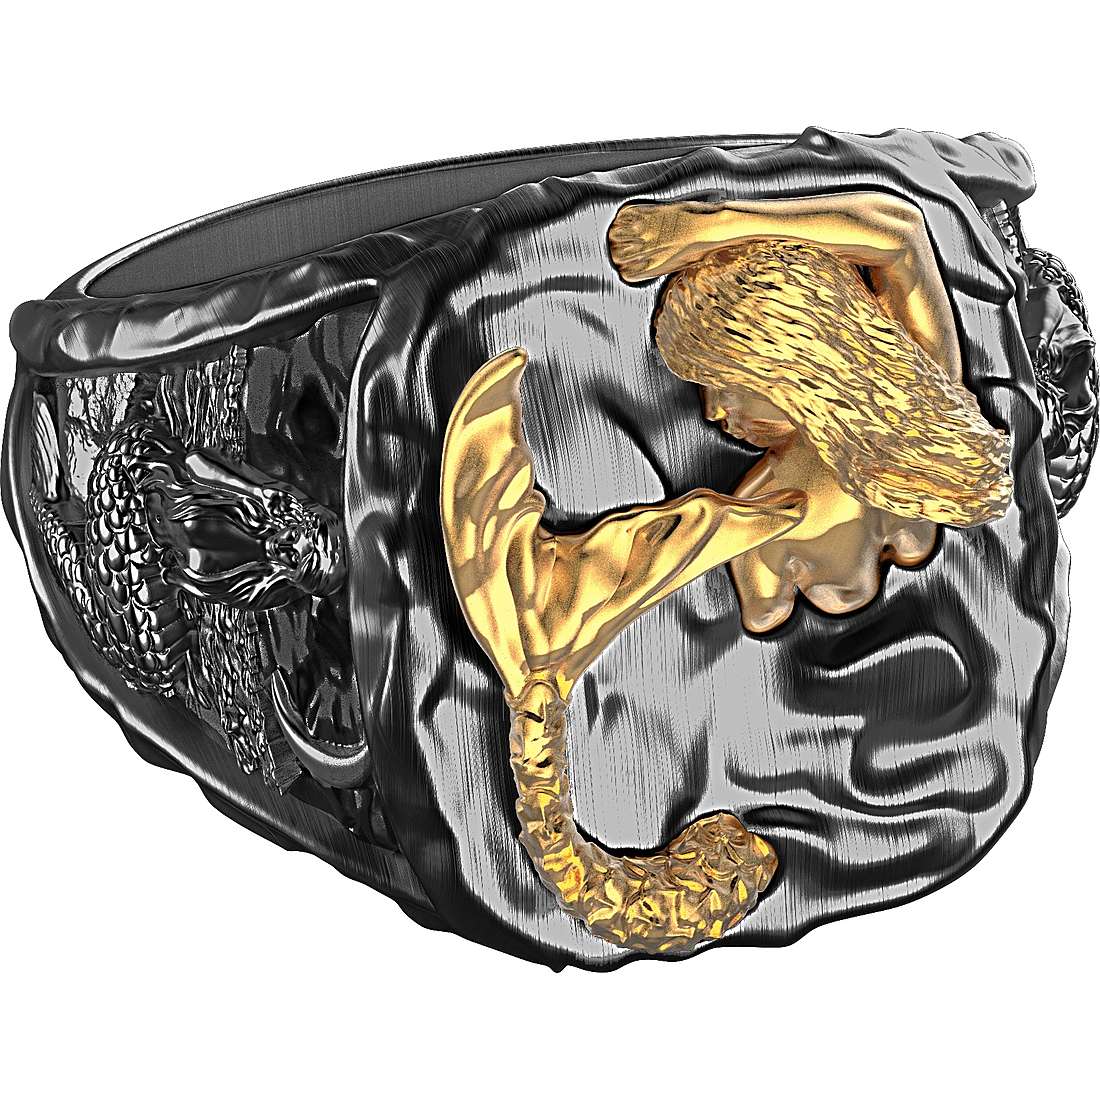 Zancan silver signet ring with dragon.